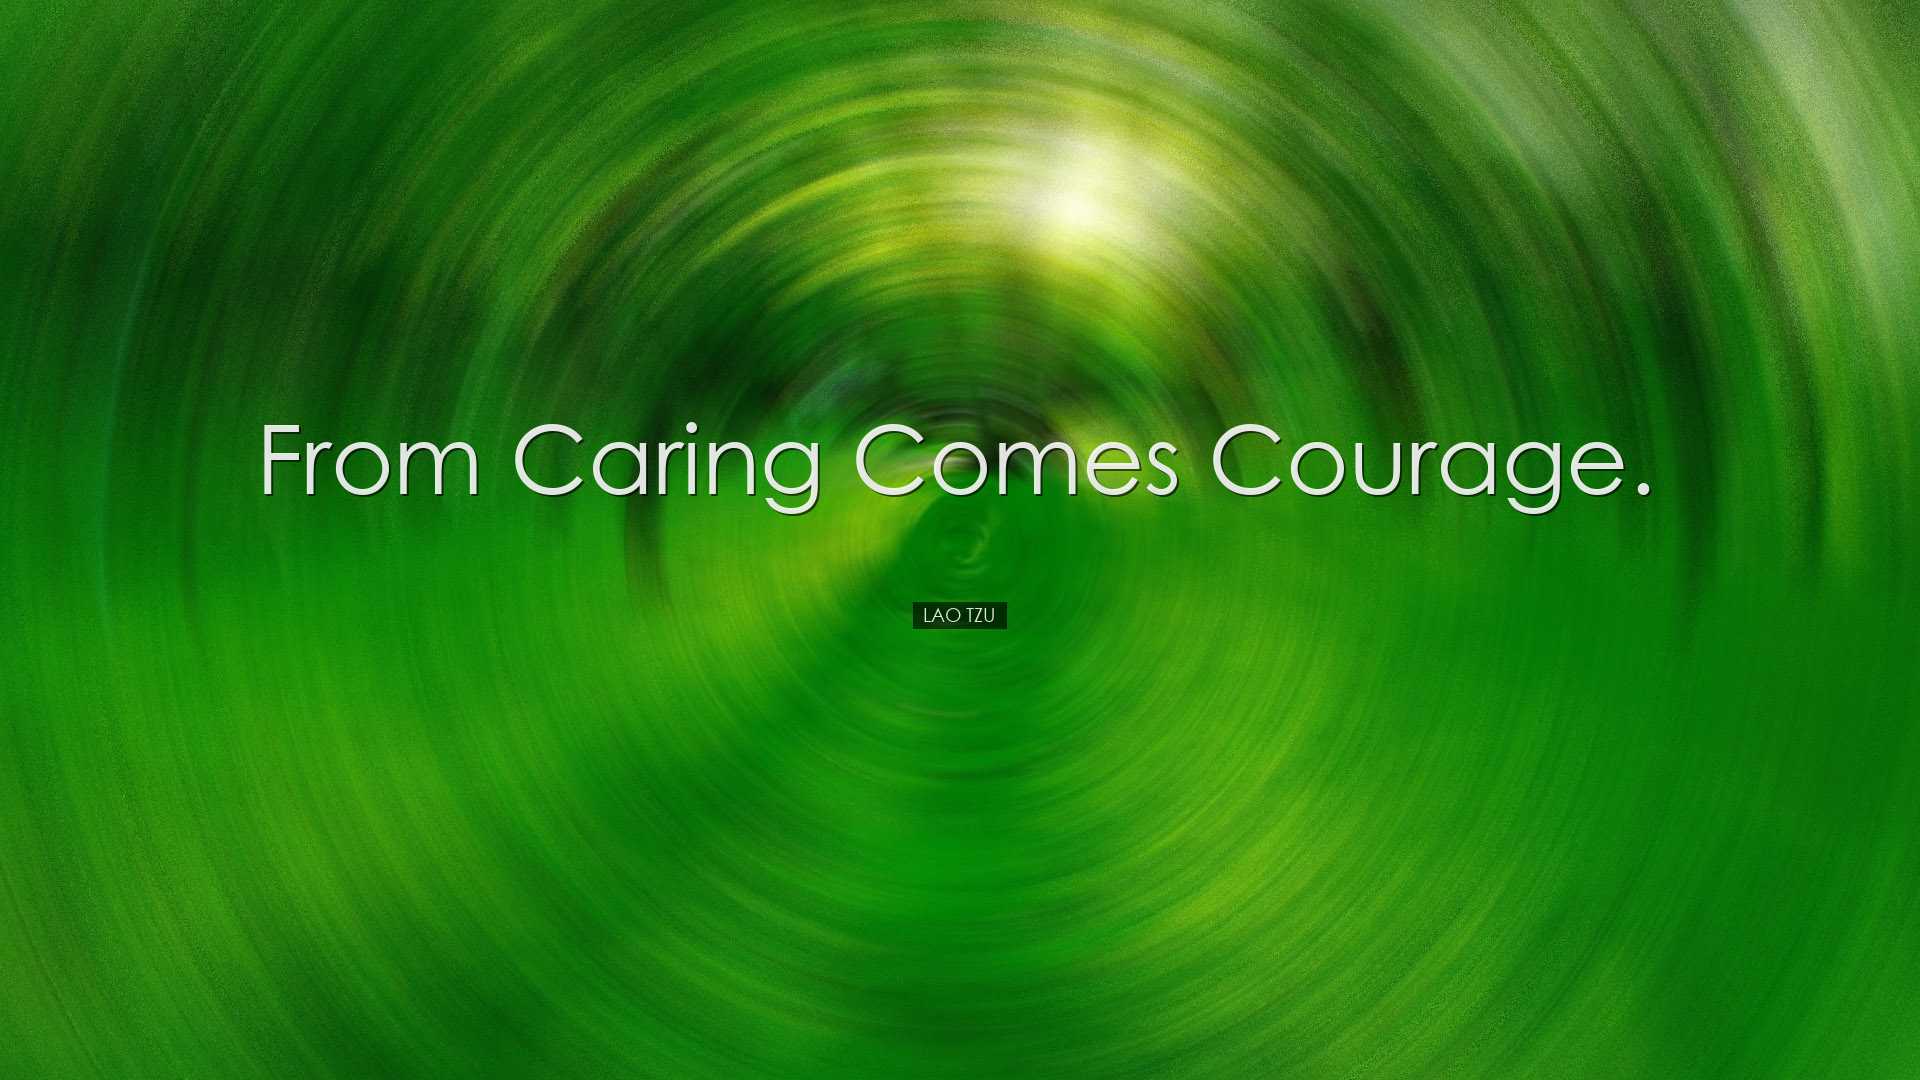 From caring comes courage. - Lao Tzu